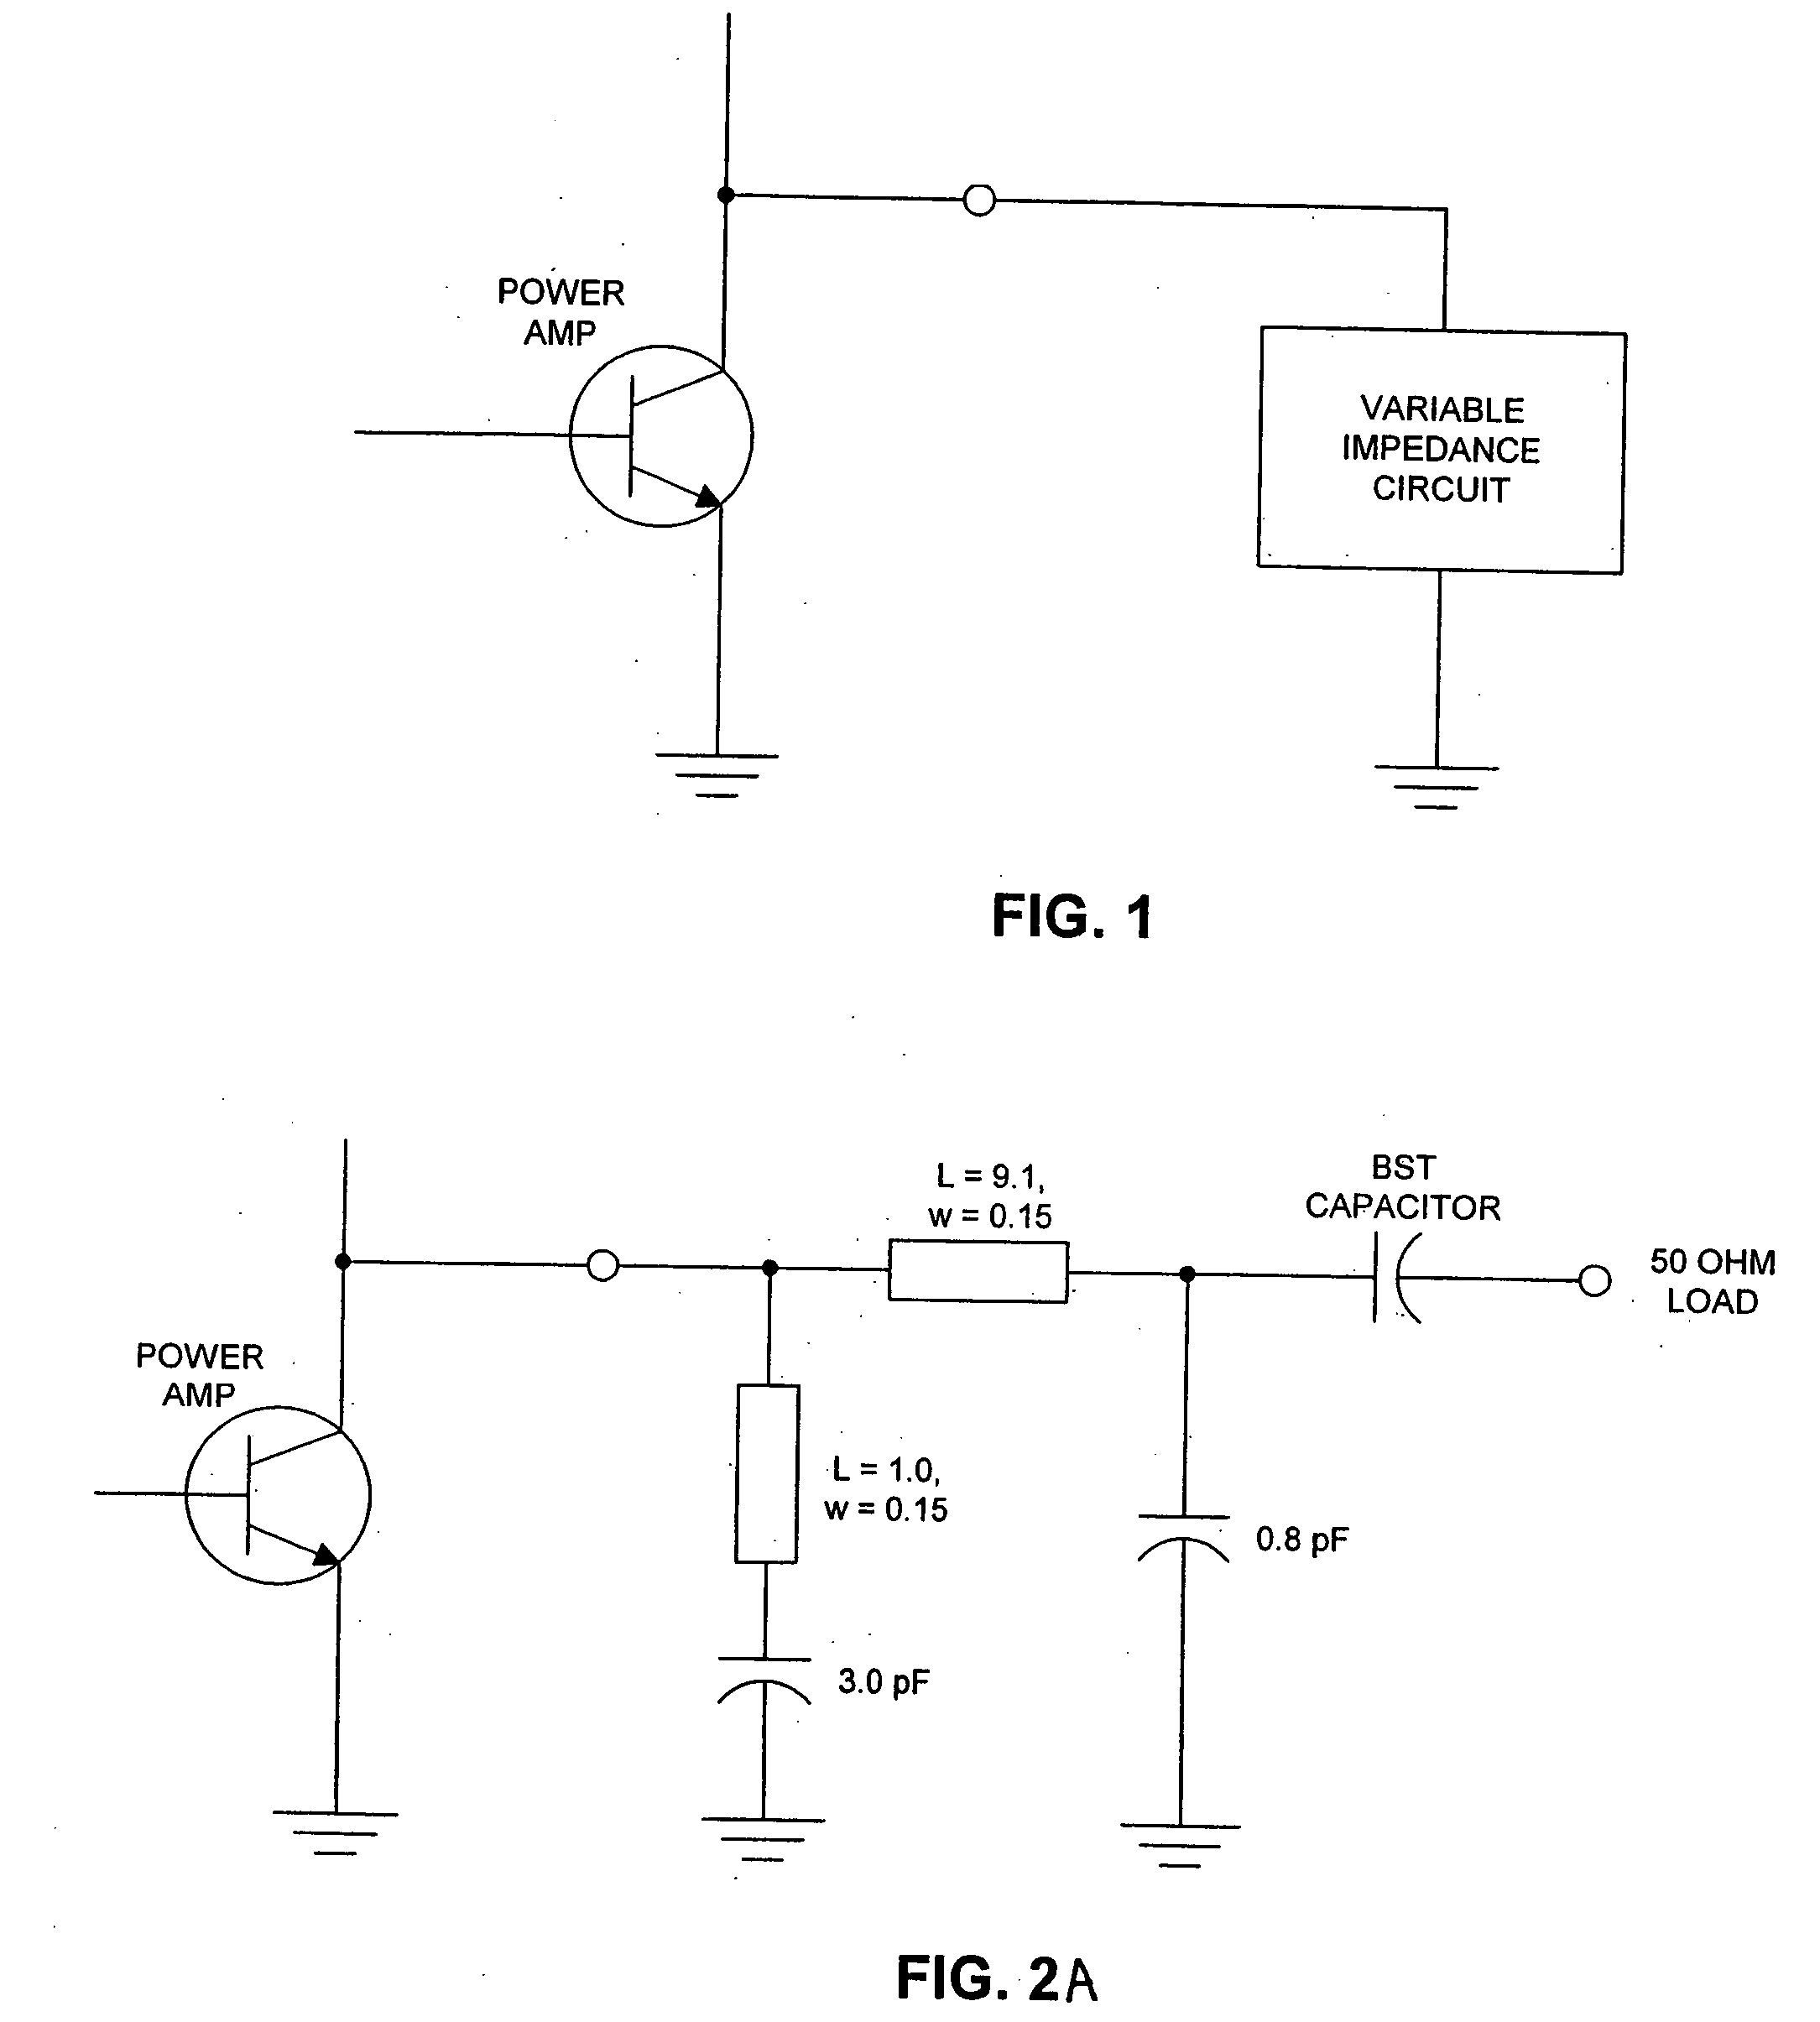 Self-tuning variable impedance circuit for impedance matching of power amplifiers